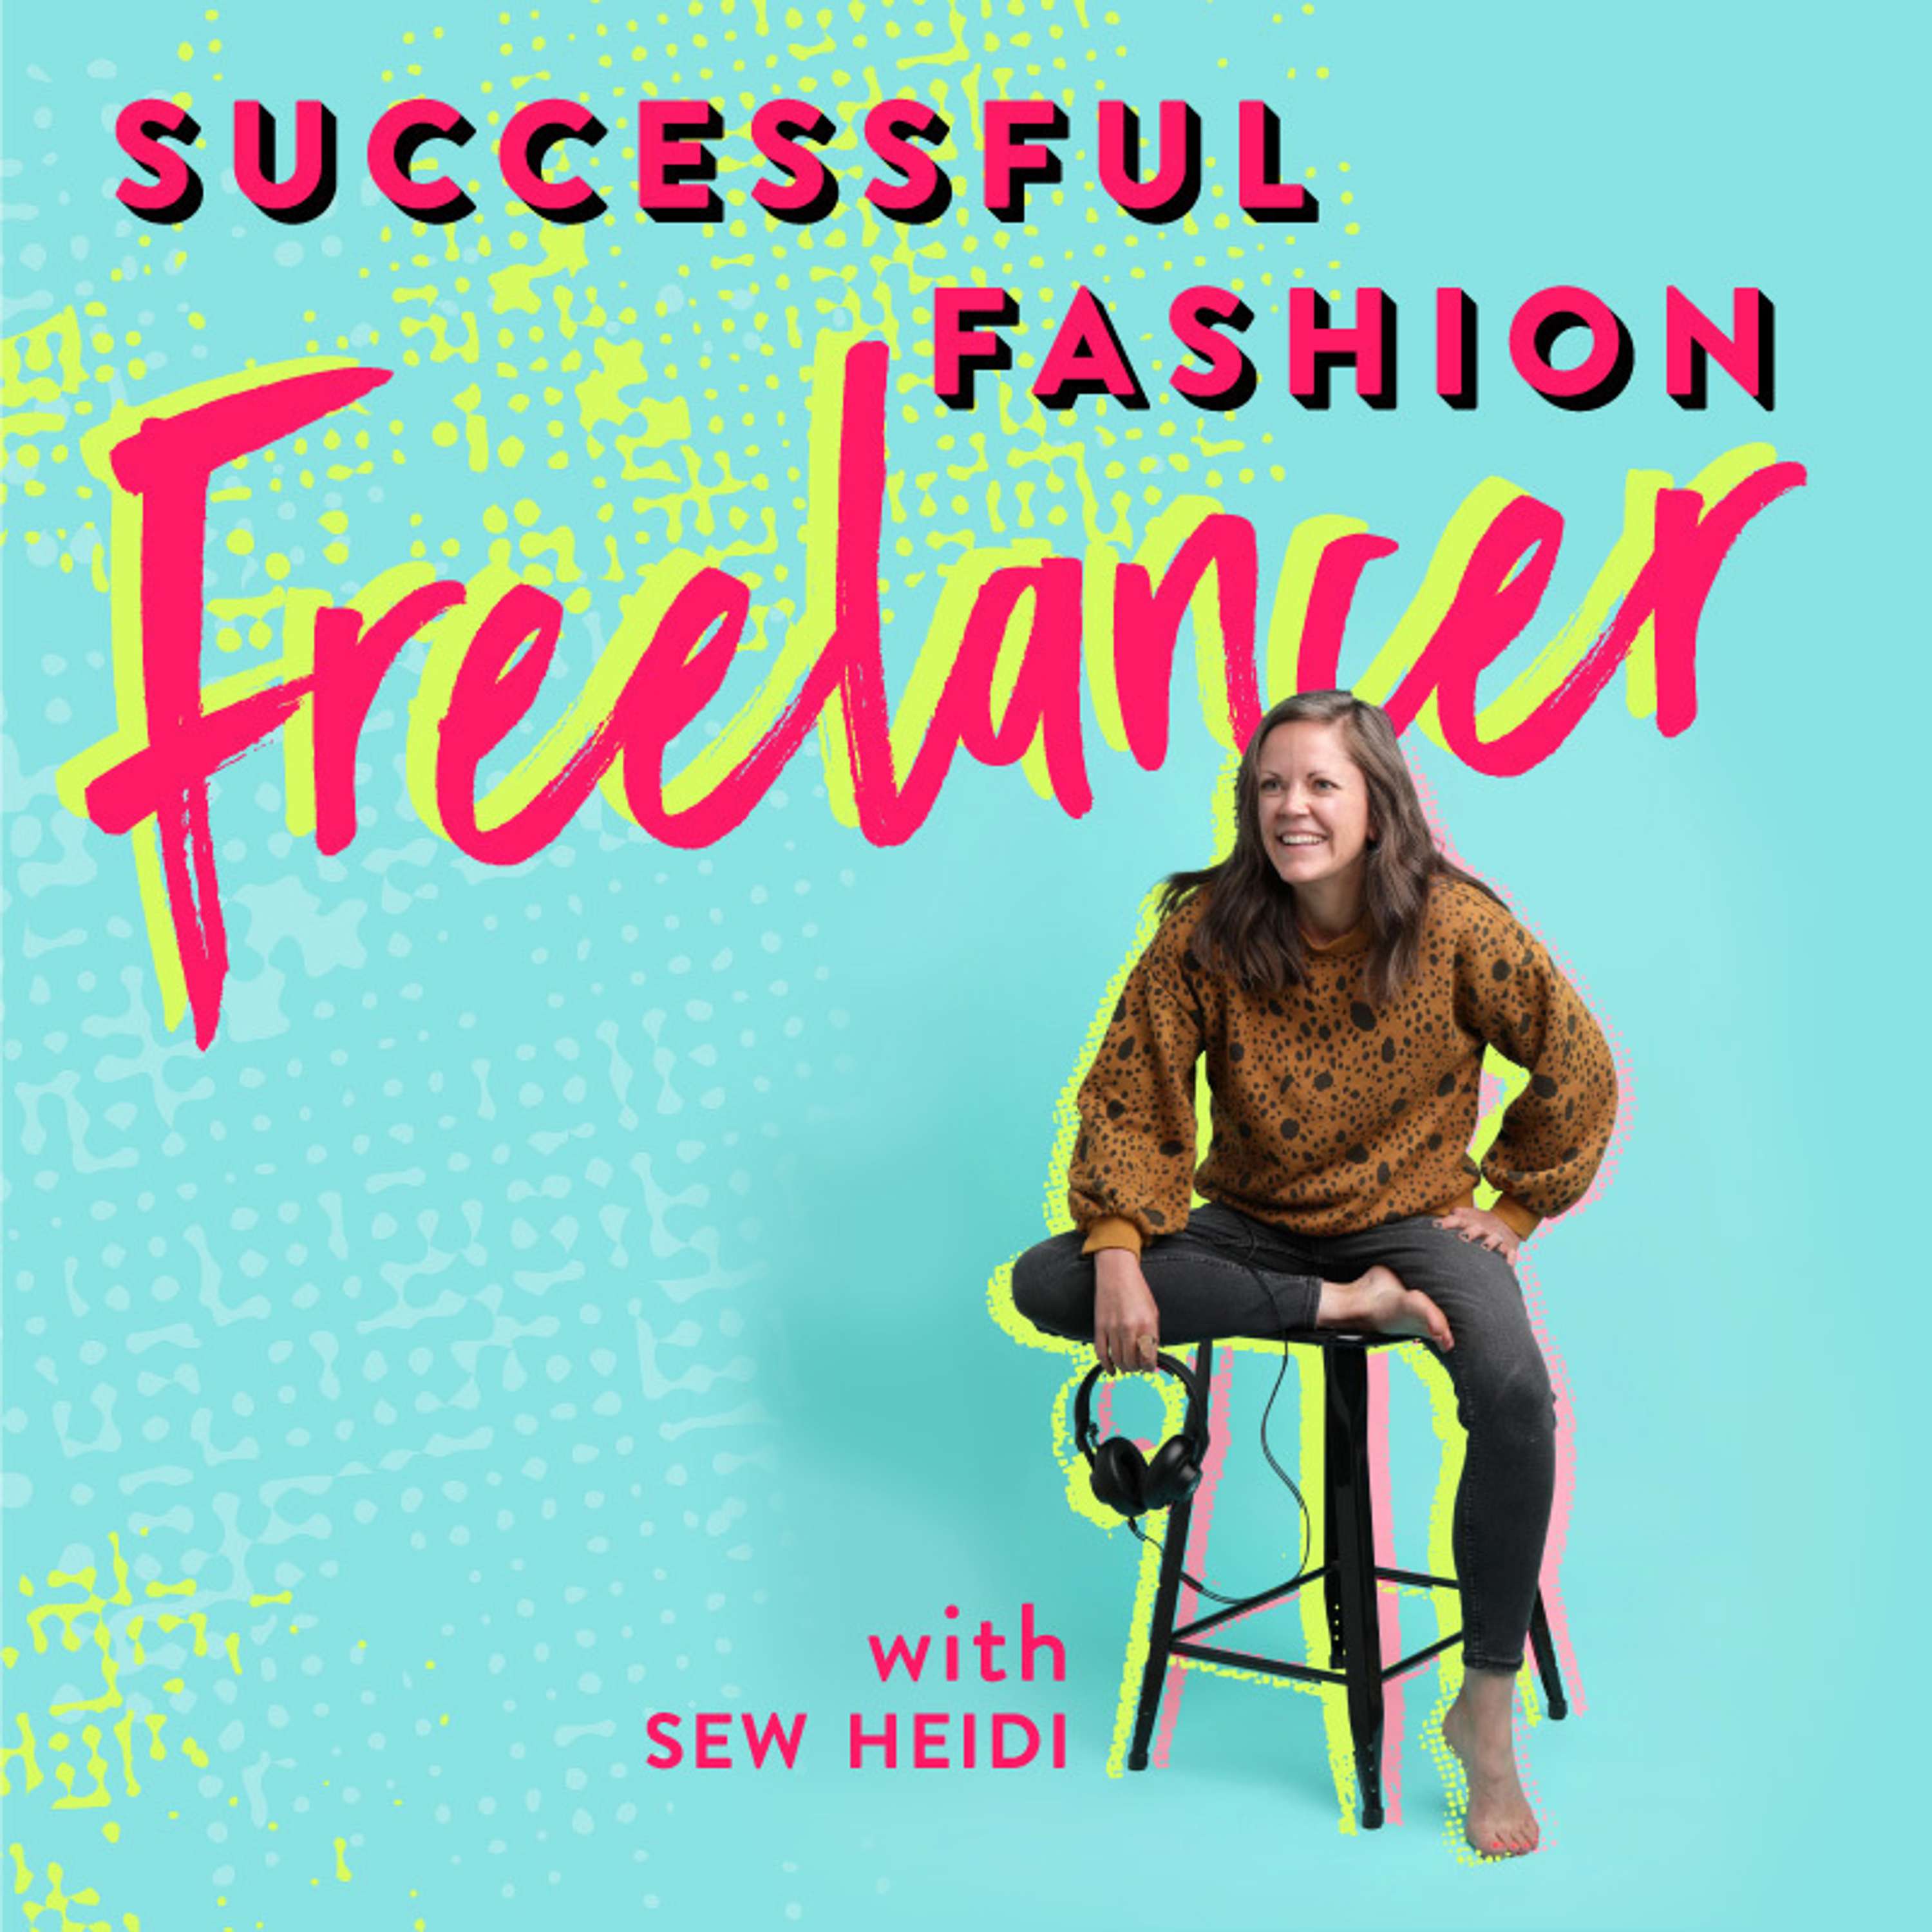 SFF135 Fashion Freelancer Q&A: What should my services be? (The skills I have or what I LOVE?)